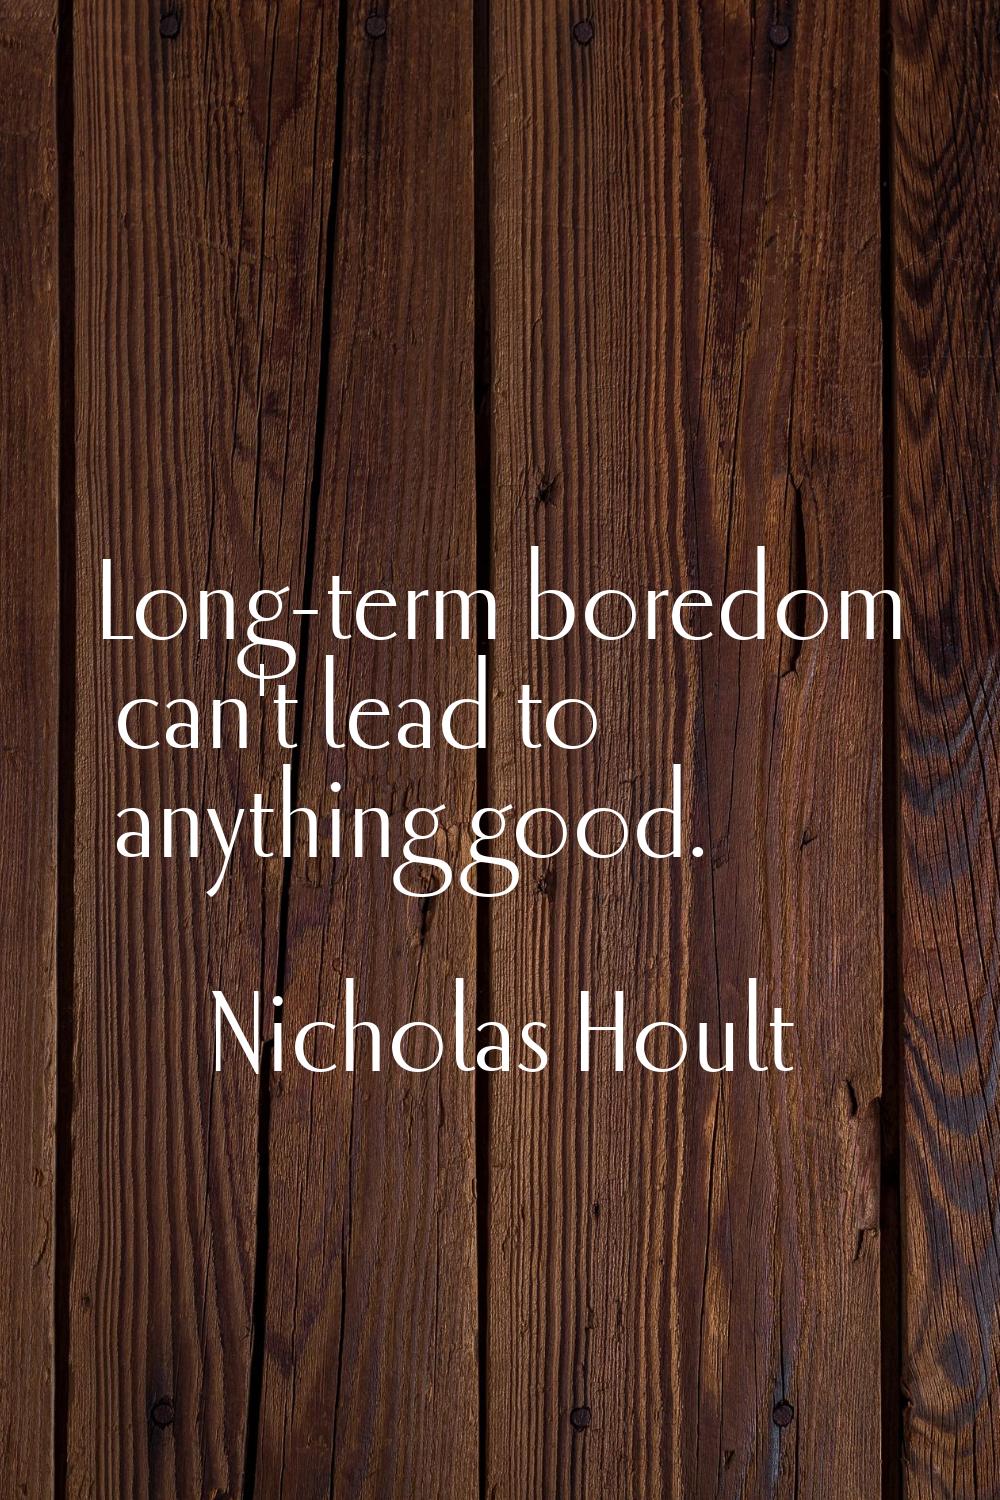 Long-term boredom can't lead to anything good.